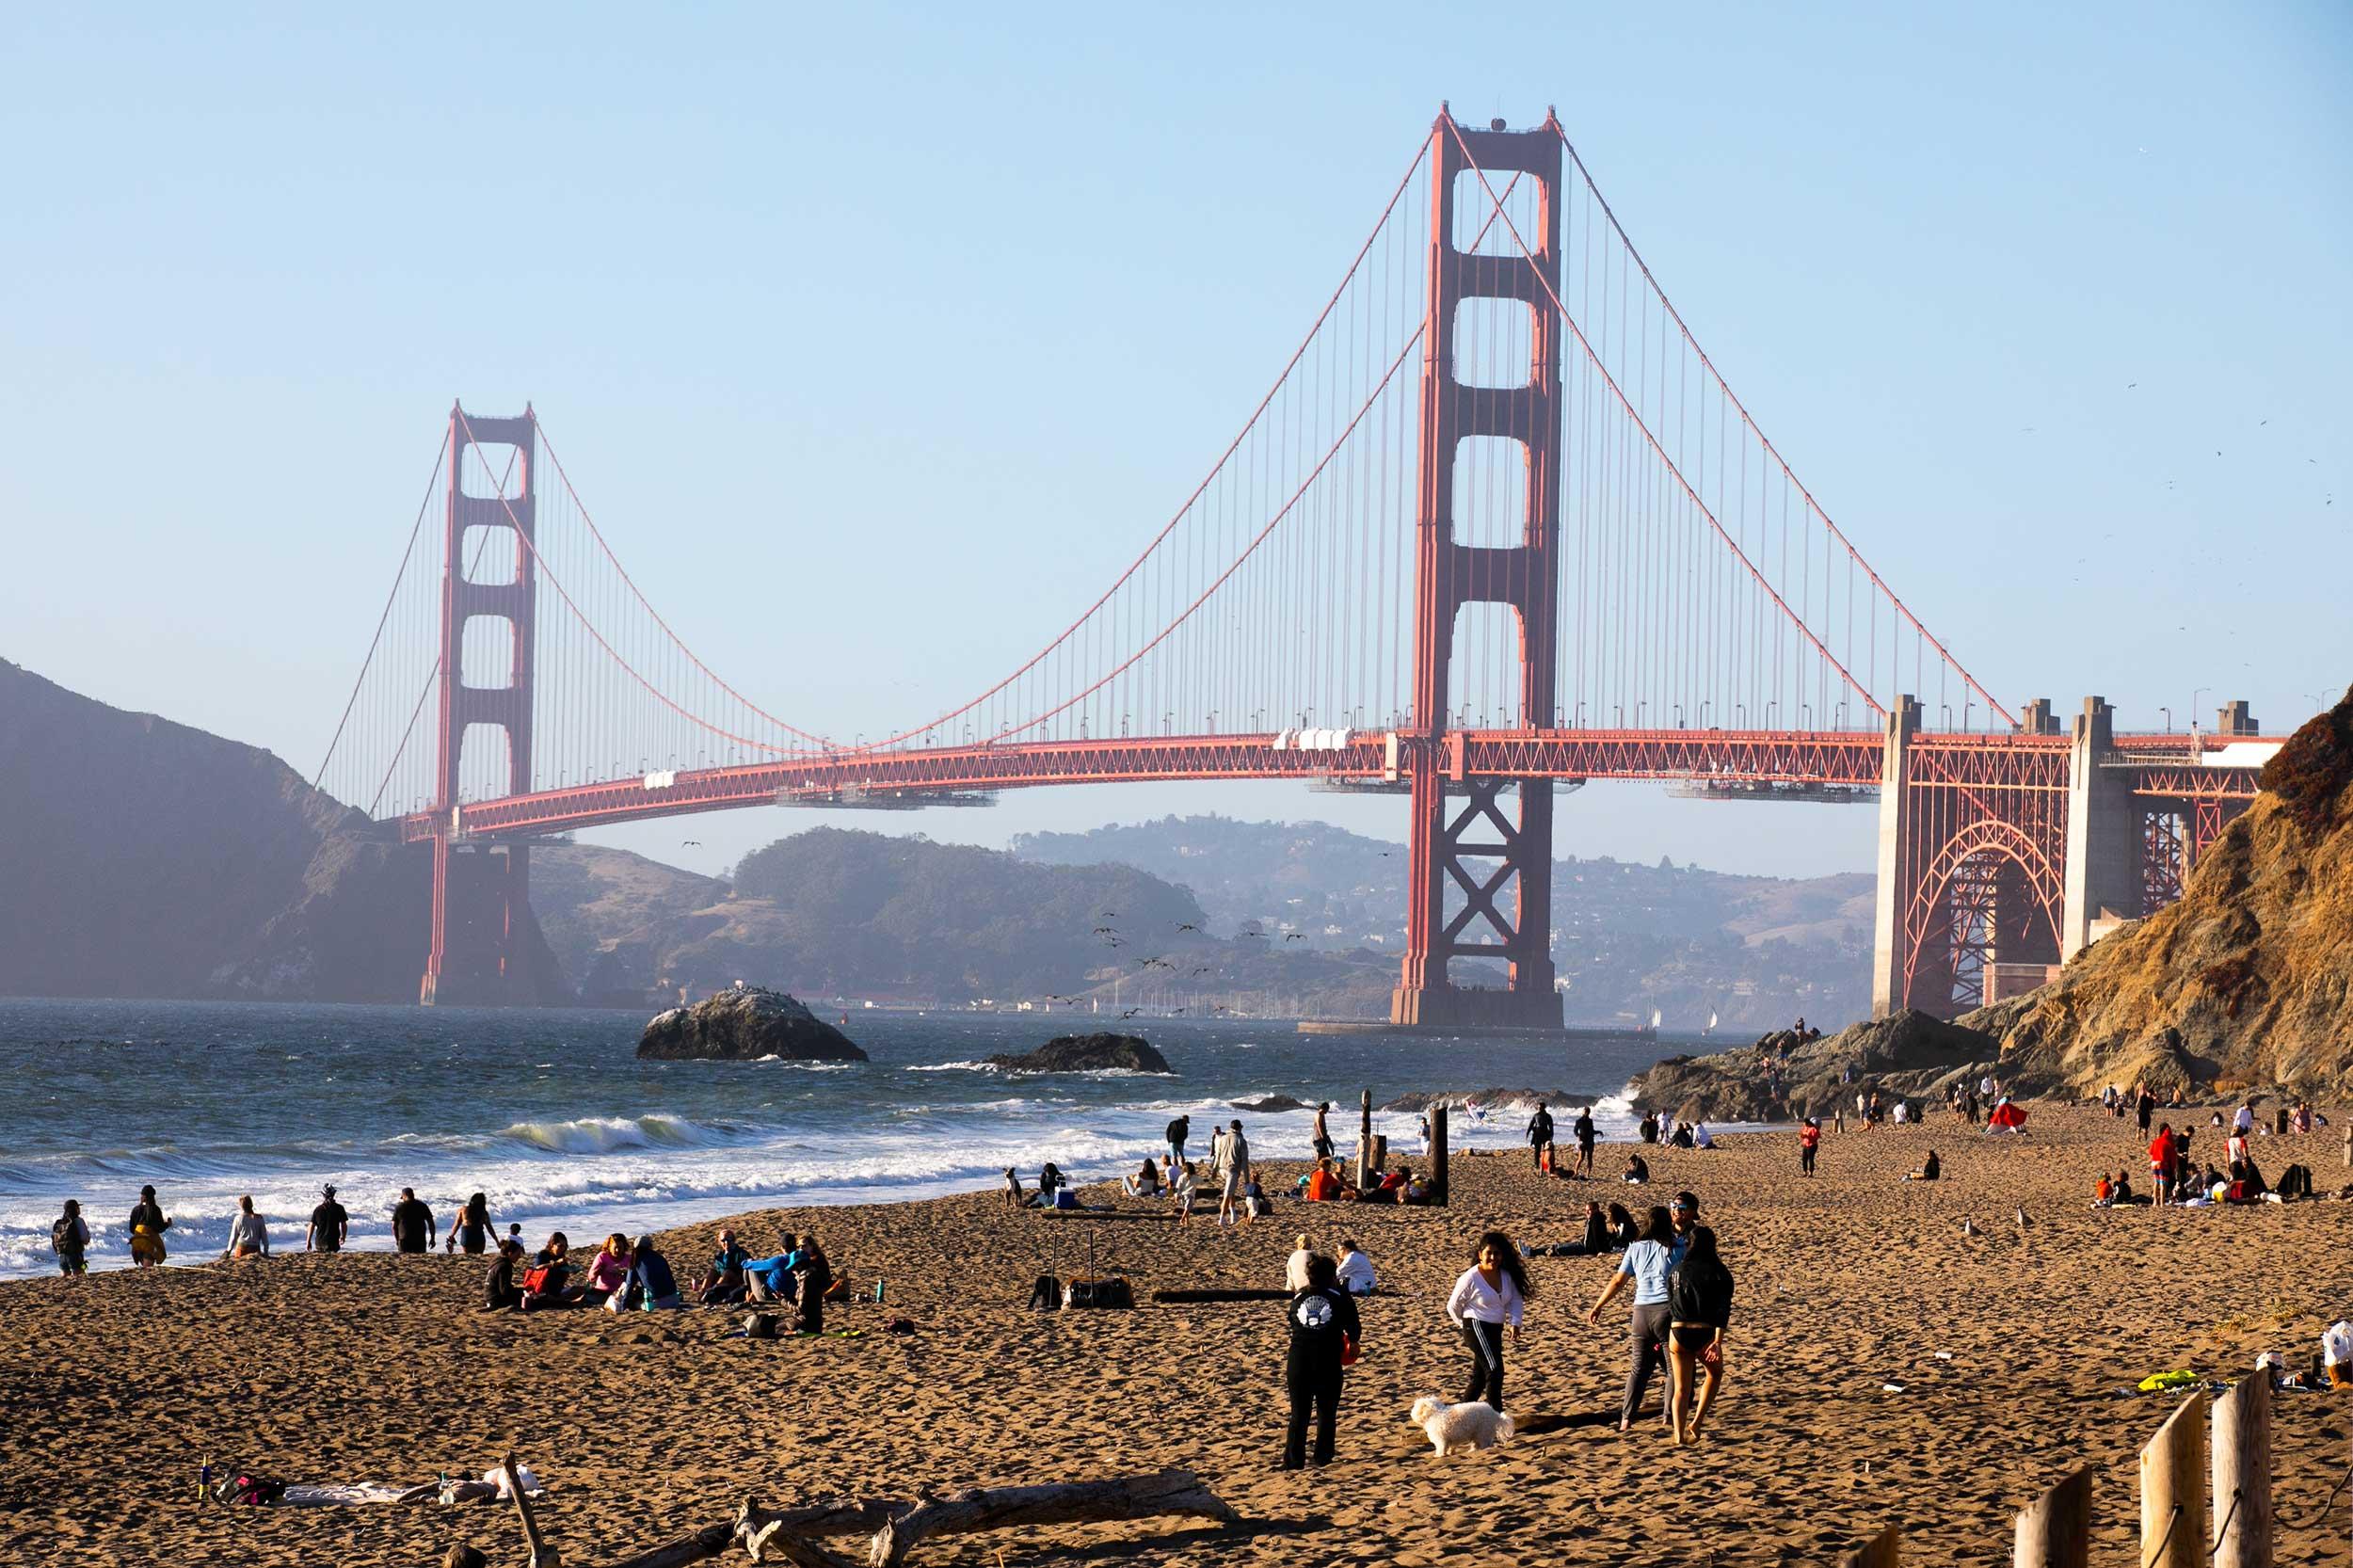 Baker Beach with the Golden Gate Bridge, with visitors on the sand.